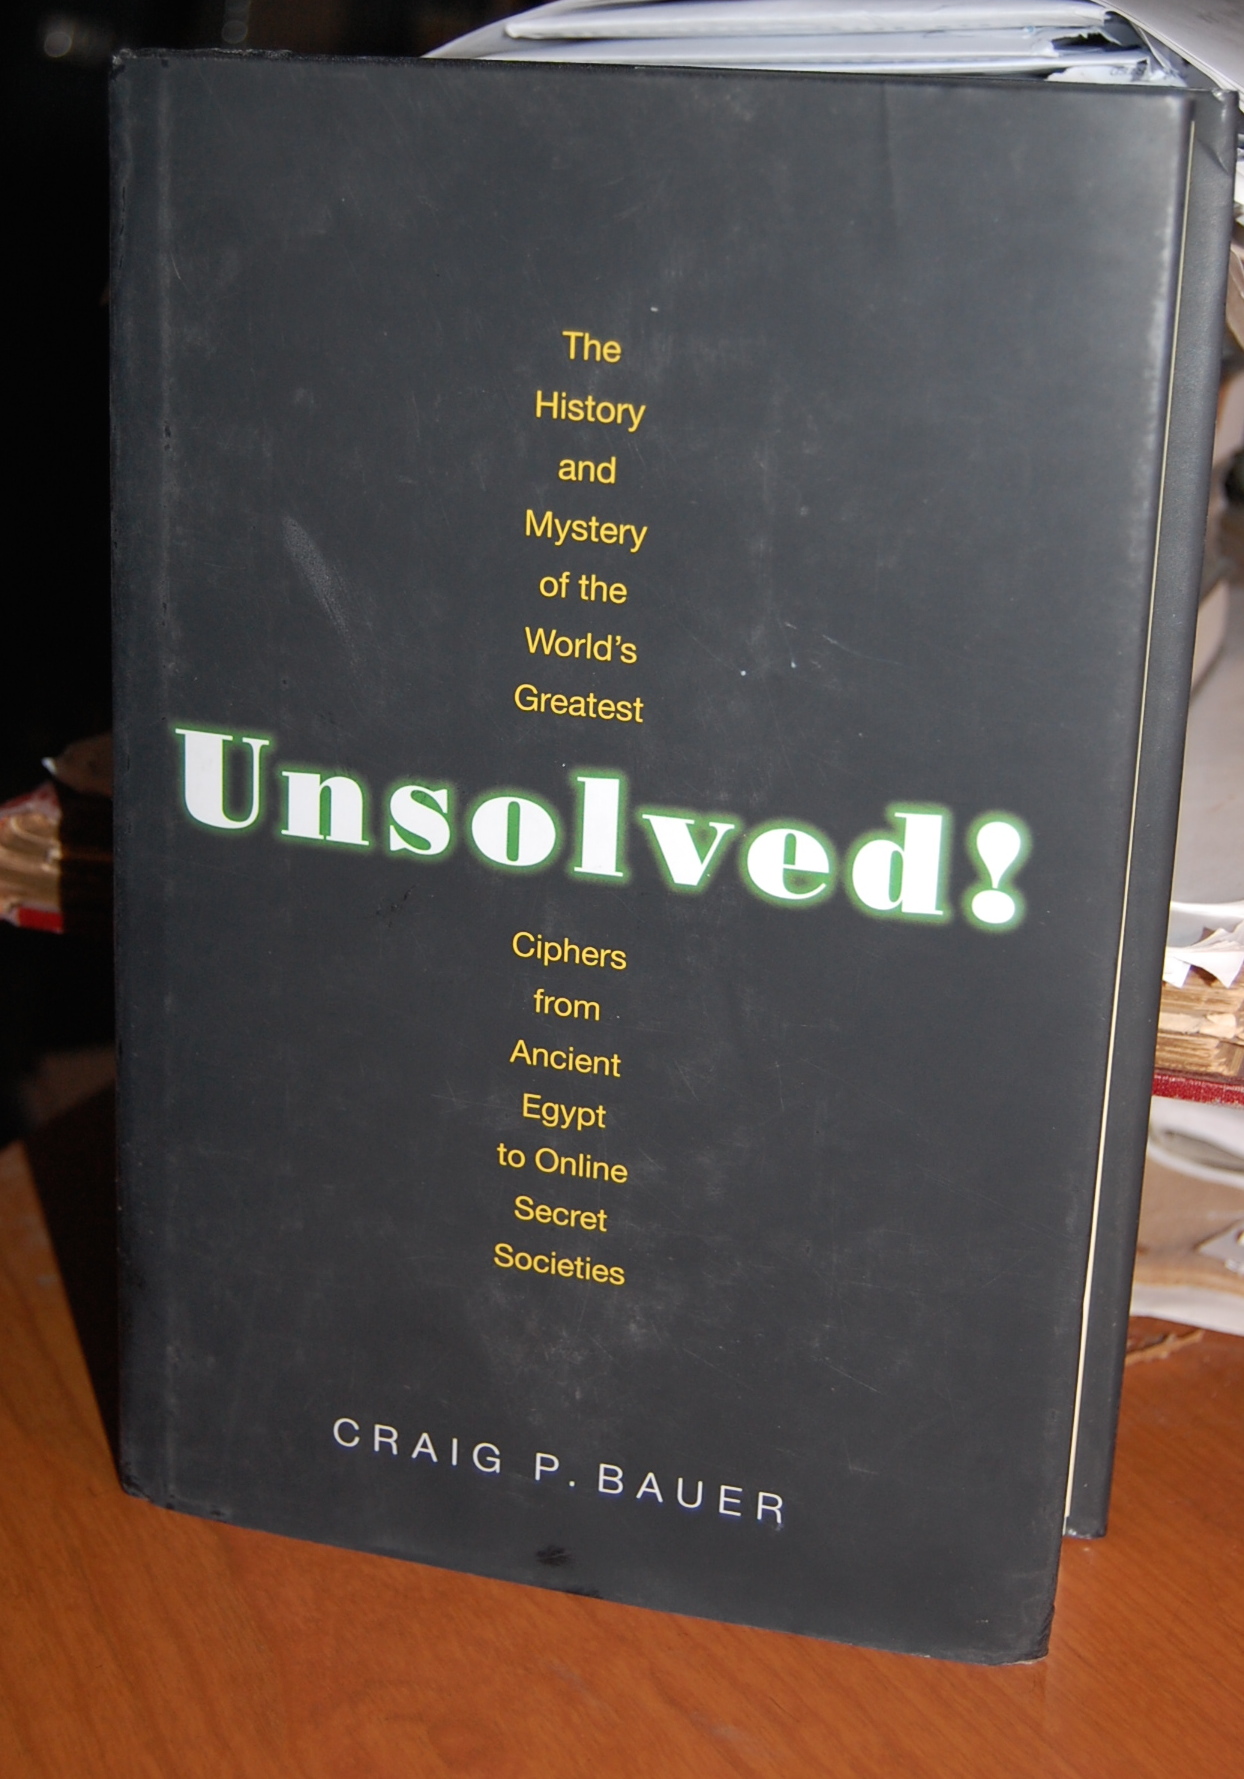 Unsolved: The History and Mystery of the Worlds Greatest Ciphers From Ancient Egypt to Online Secret Societies. - Bauer, Craig P.